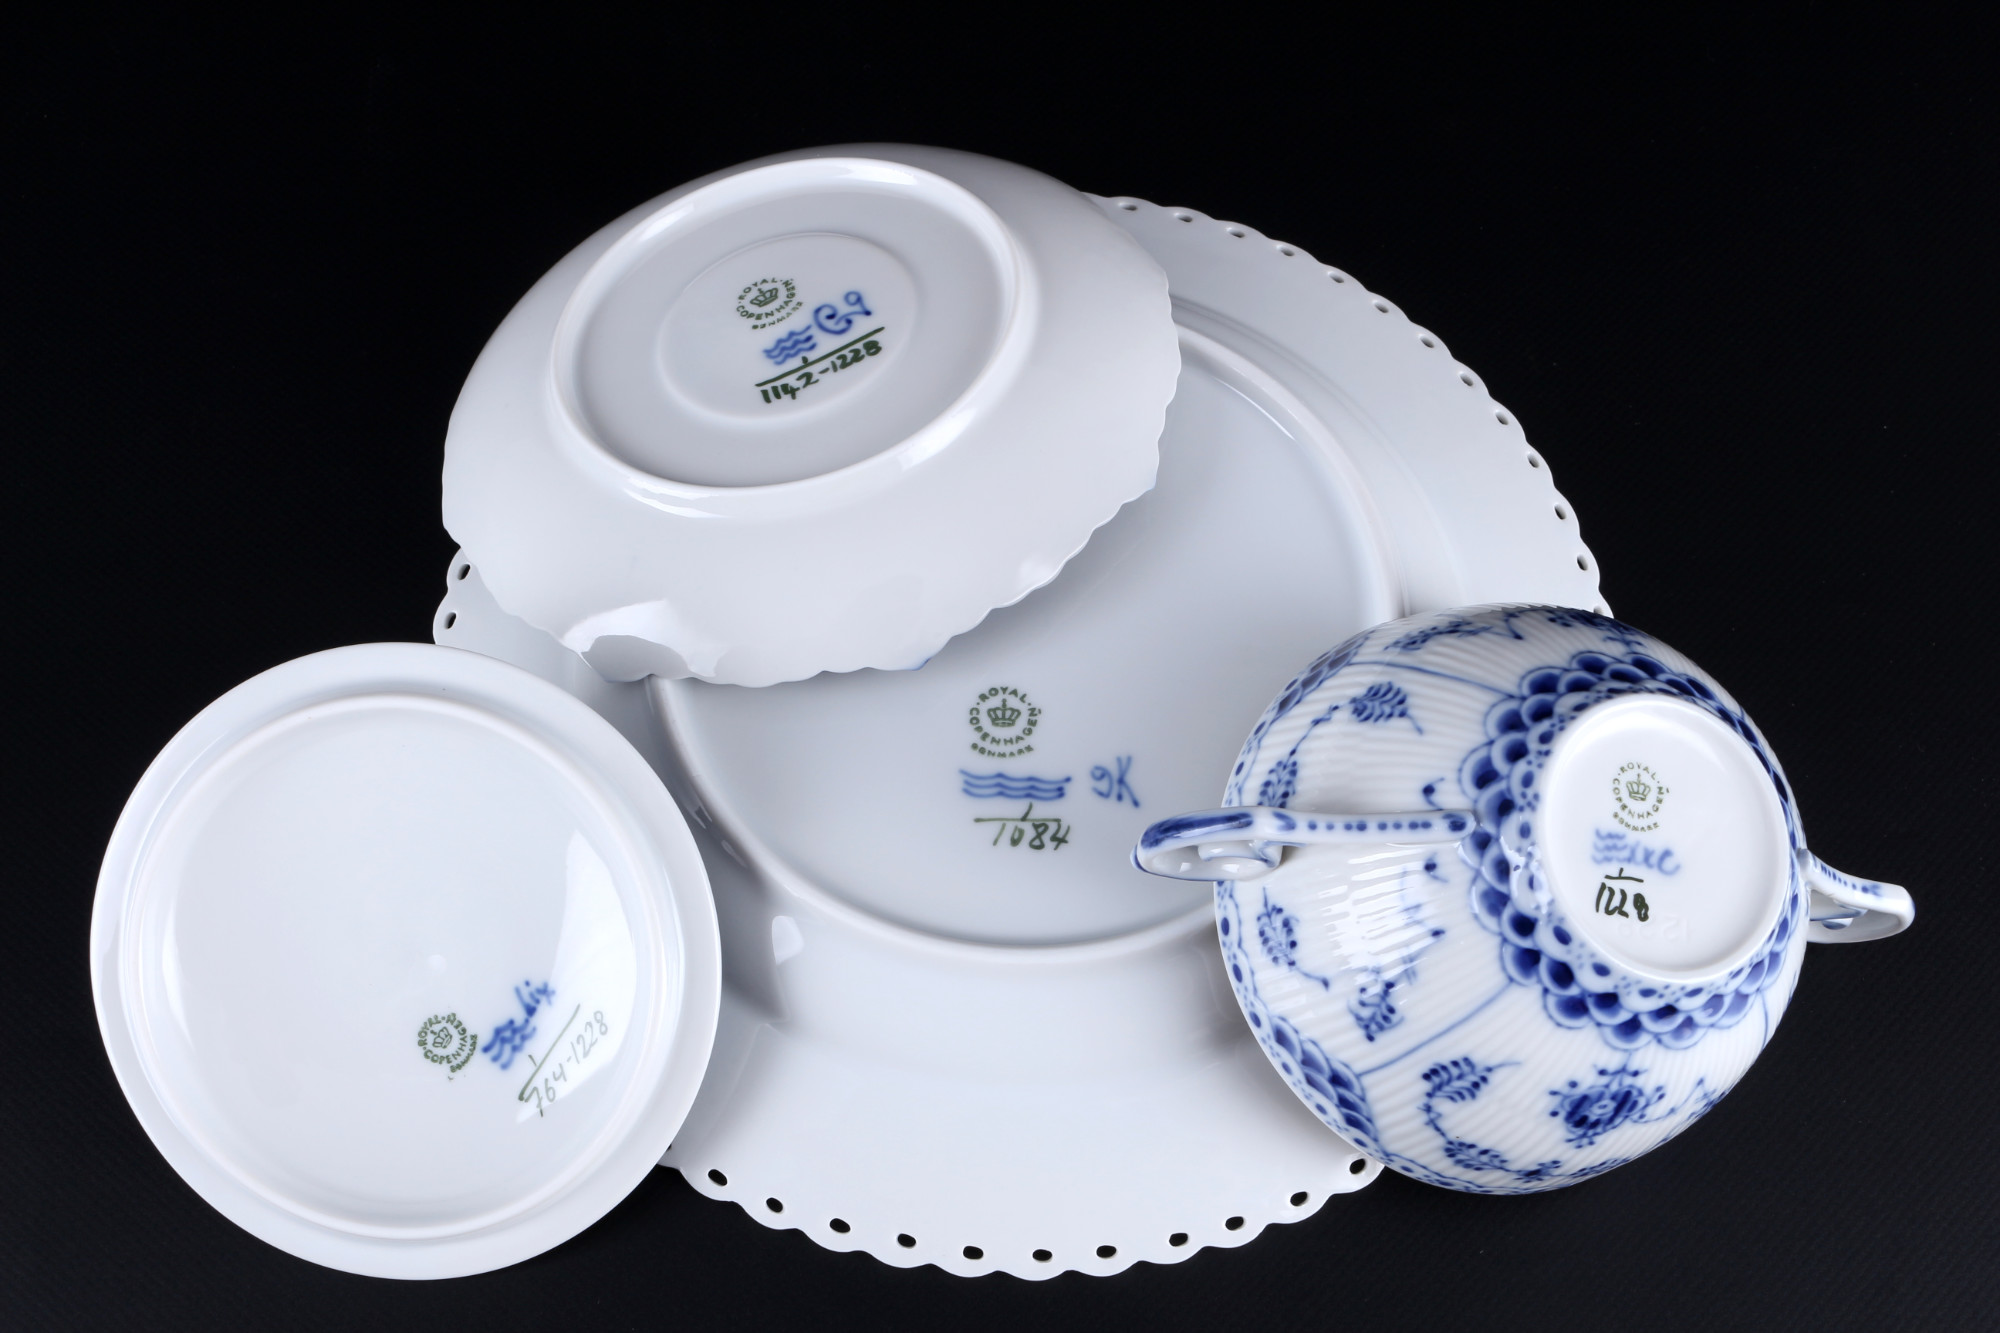 Royal Copenhagen Musselmalet Full Lace 3 soup cups and 3 dinner plates 1st choice, Suppentassen und  - Image 4 of 4